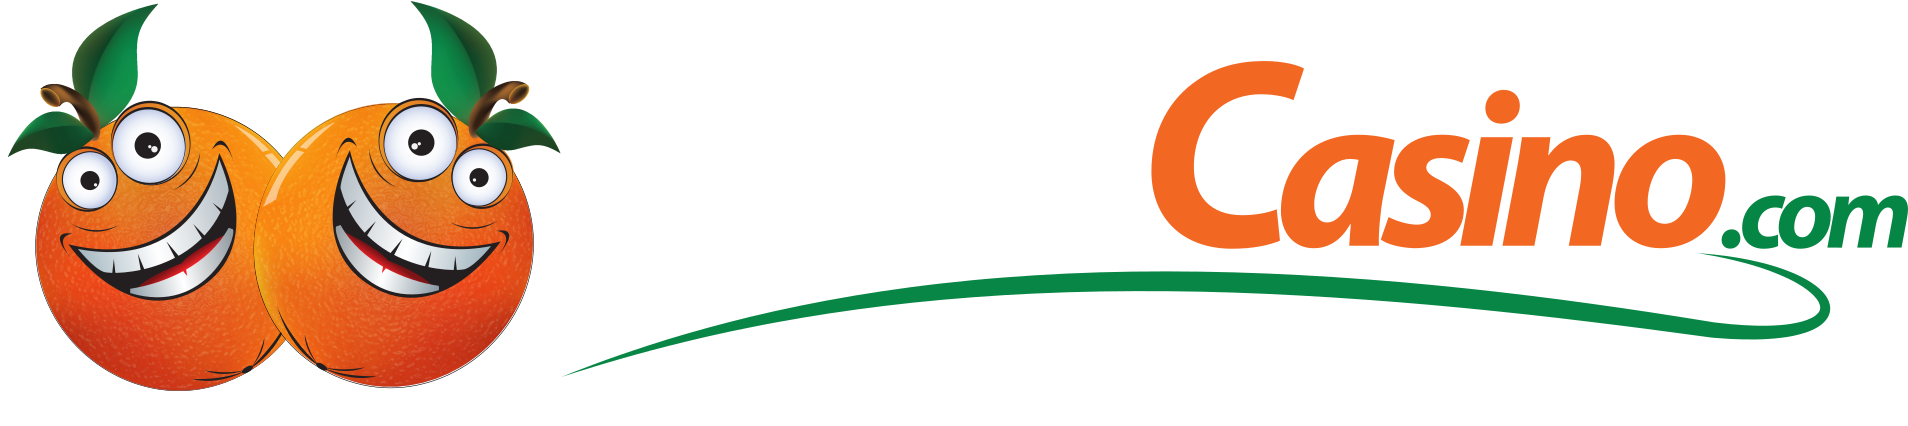 Casino as One of the Easy Withdrawal Internet Casinos with play money